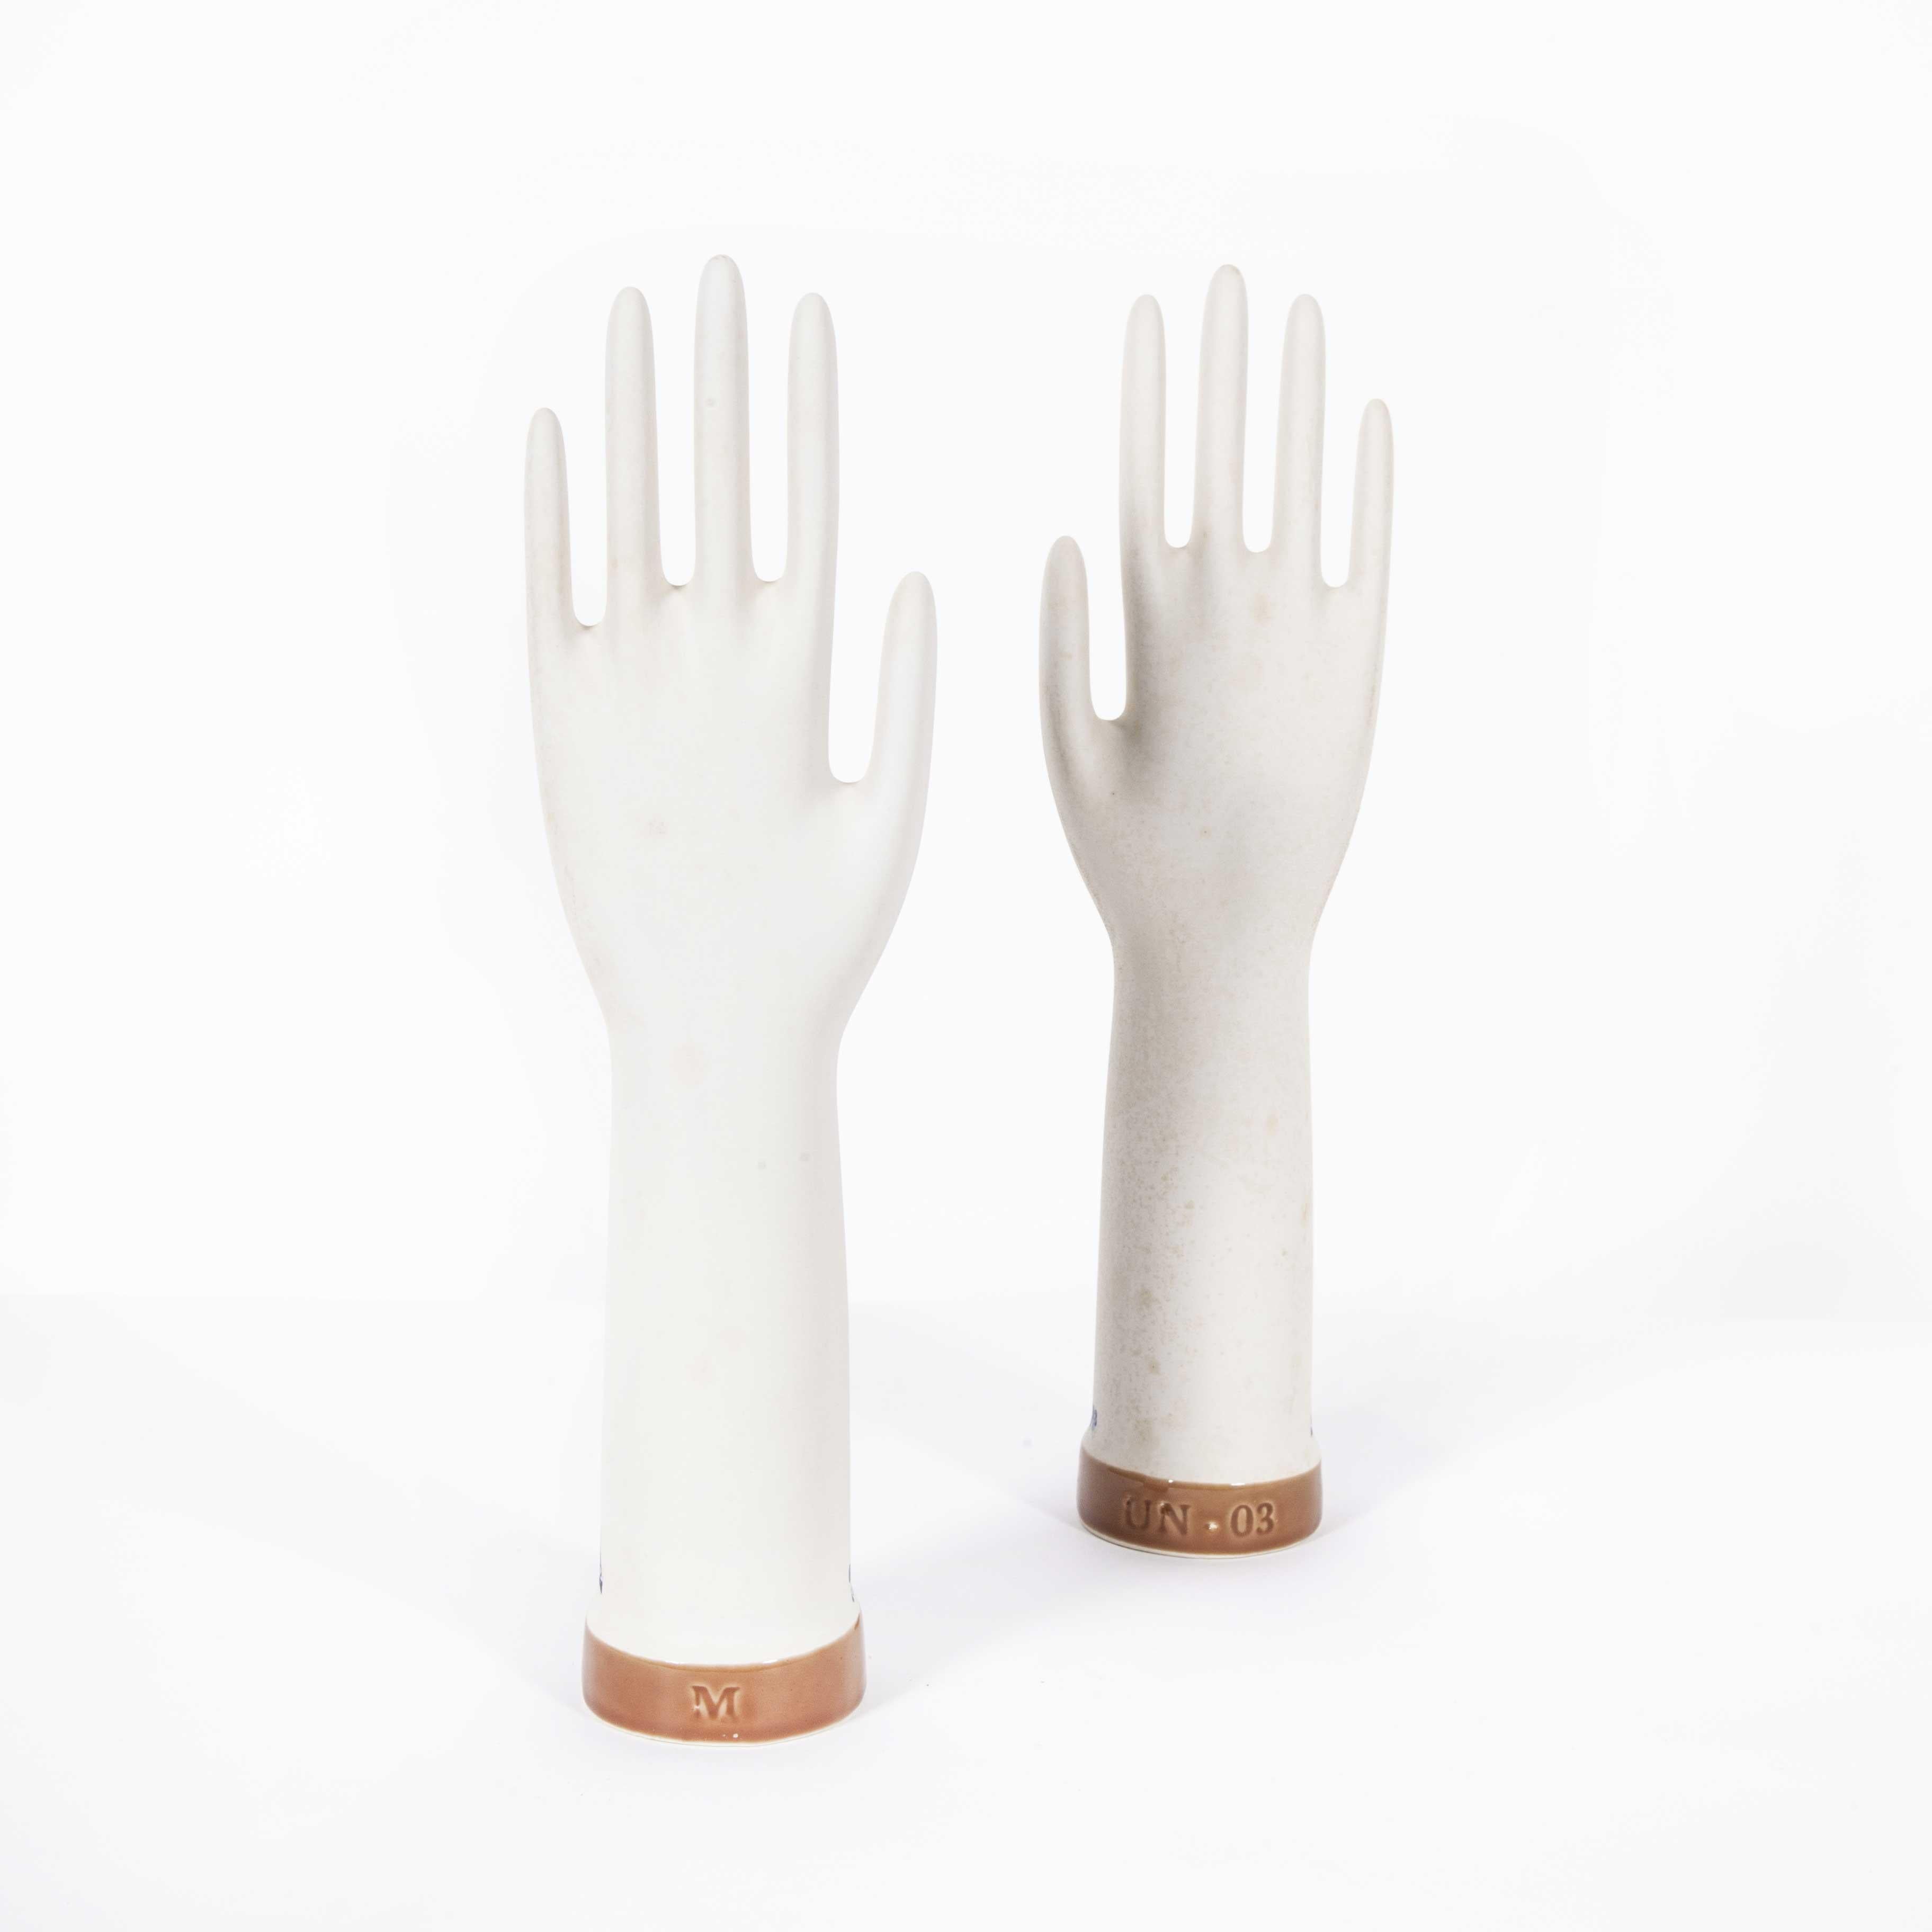 1960s ceramic rubber glove hand moulds– Singles. Sold singularly these hands were mounted on a slow rotating metal arm which was dipped in molten rubber as a male mould to form rubber gloves.

Workshop report:

Our workshop team inspect every